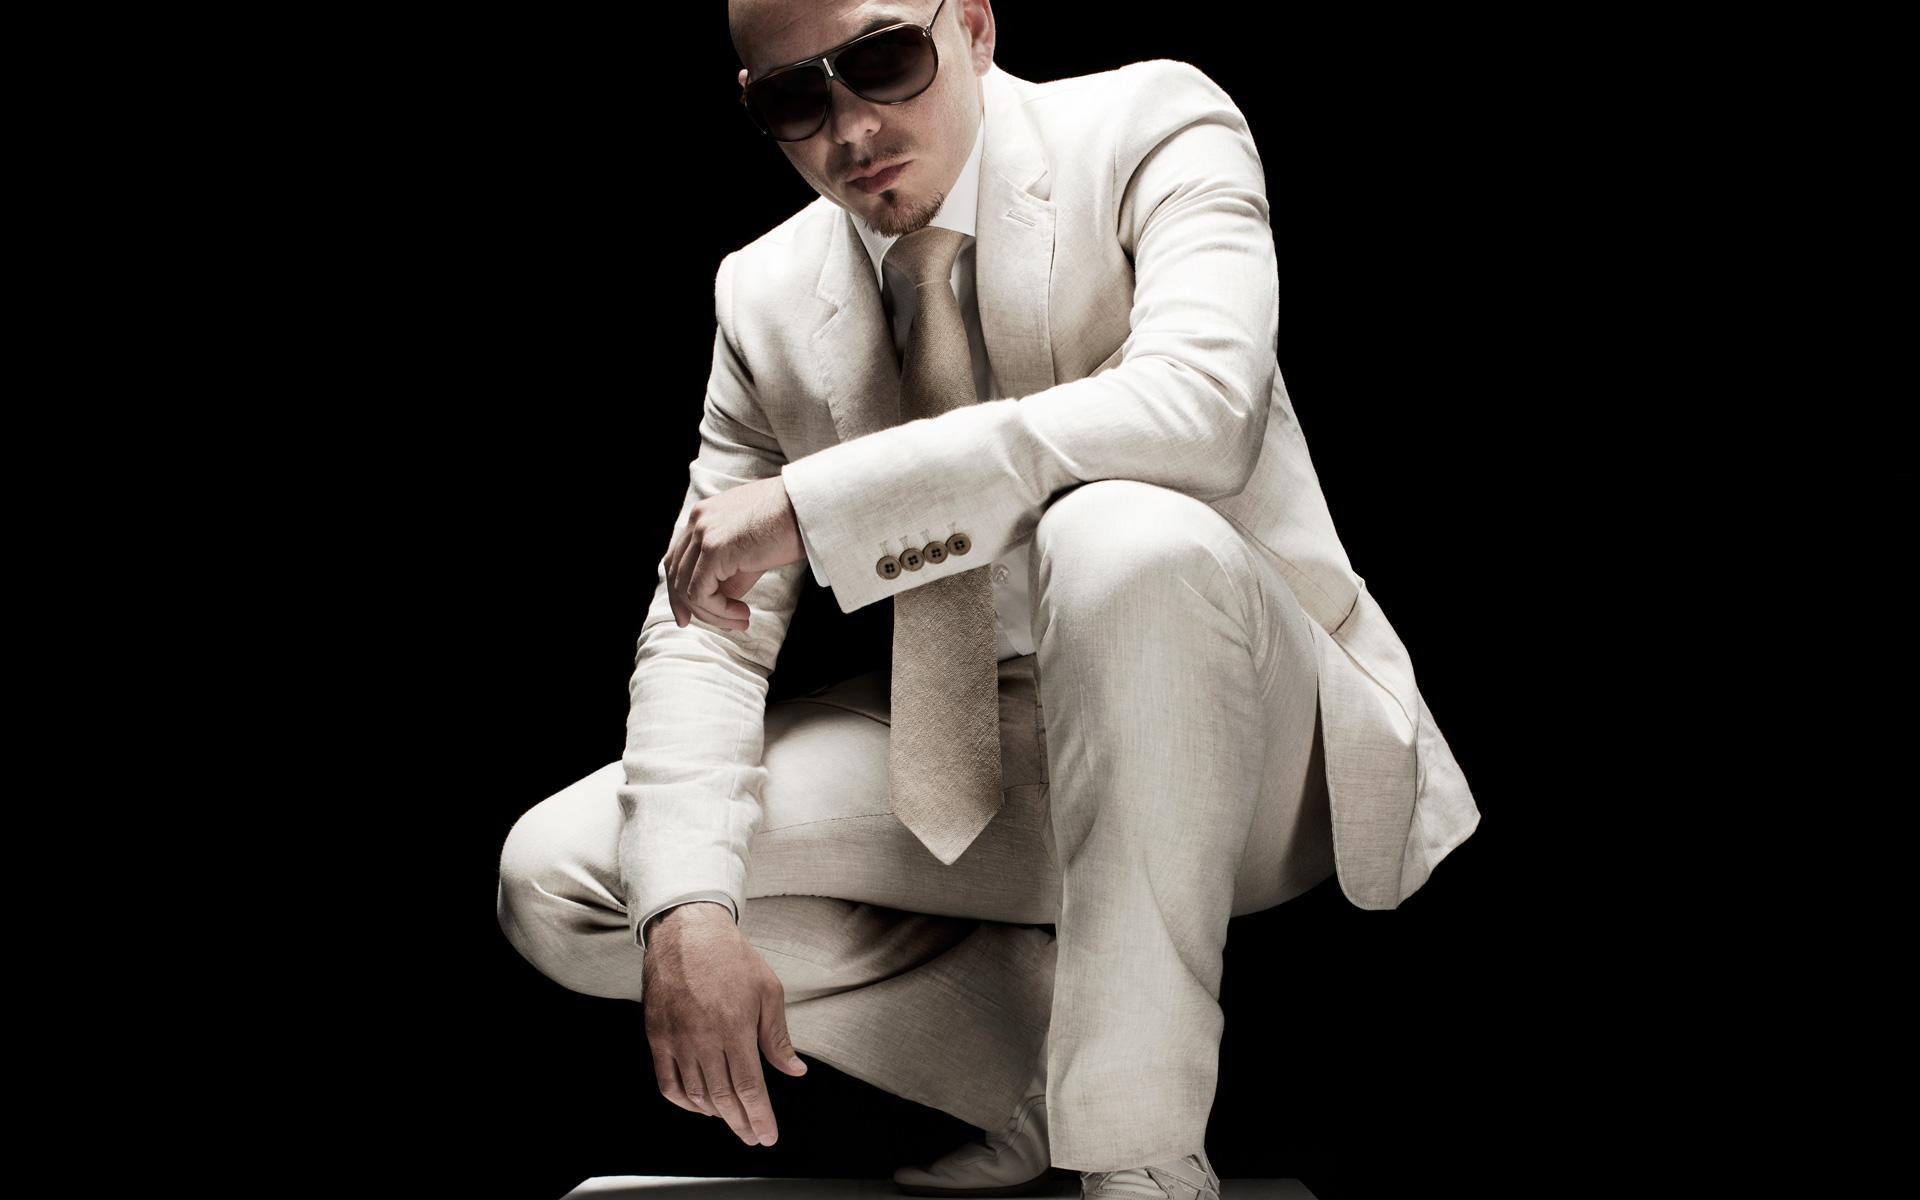 Wallpapers of singer Pitbull in high definition.